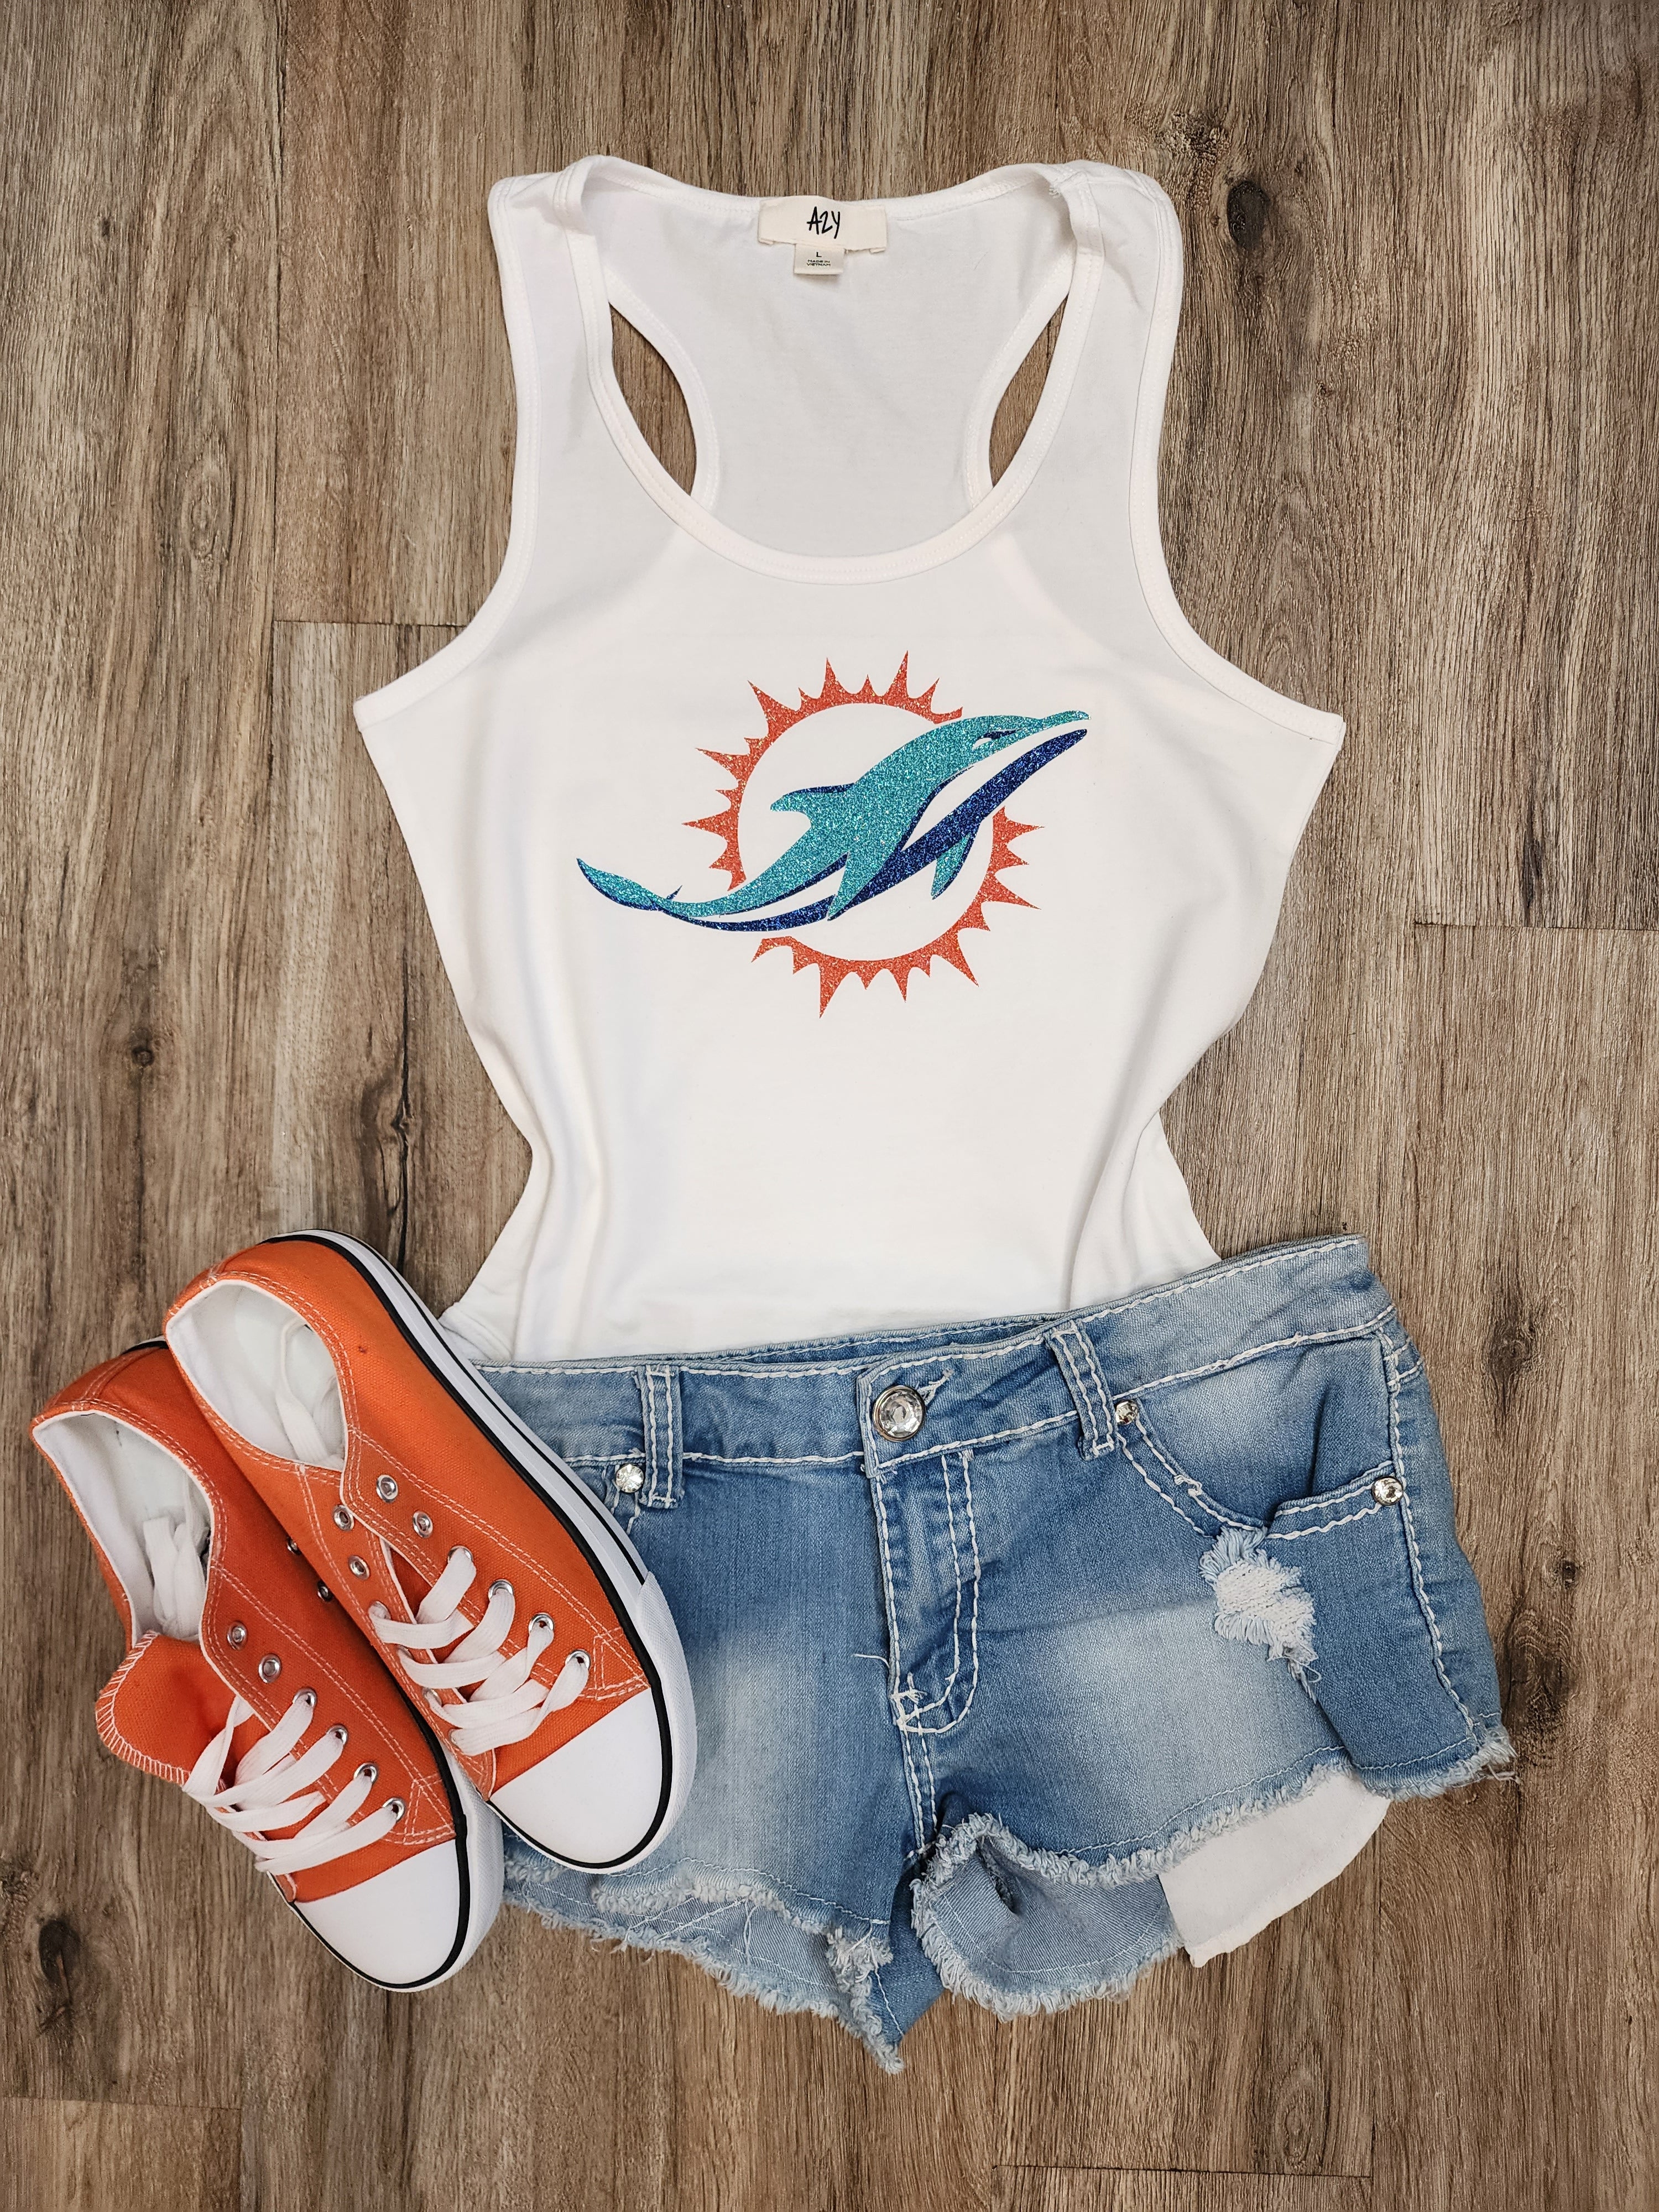 Miami Dolphins Inspired Glitter Top